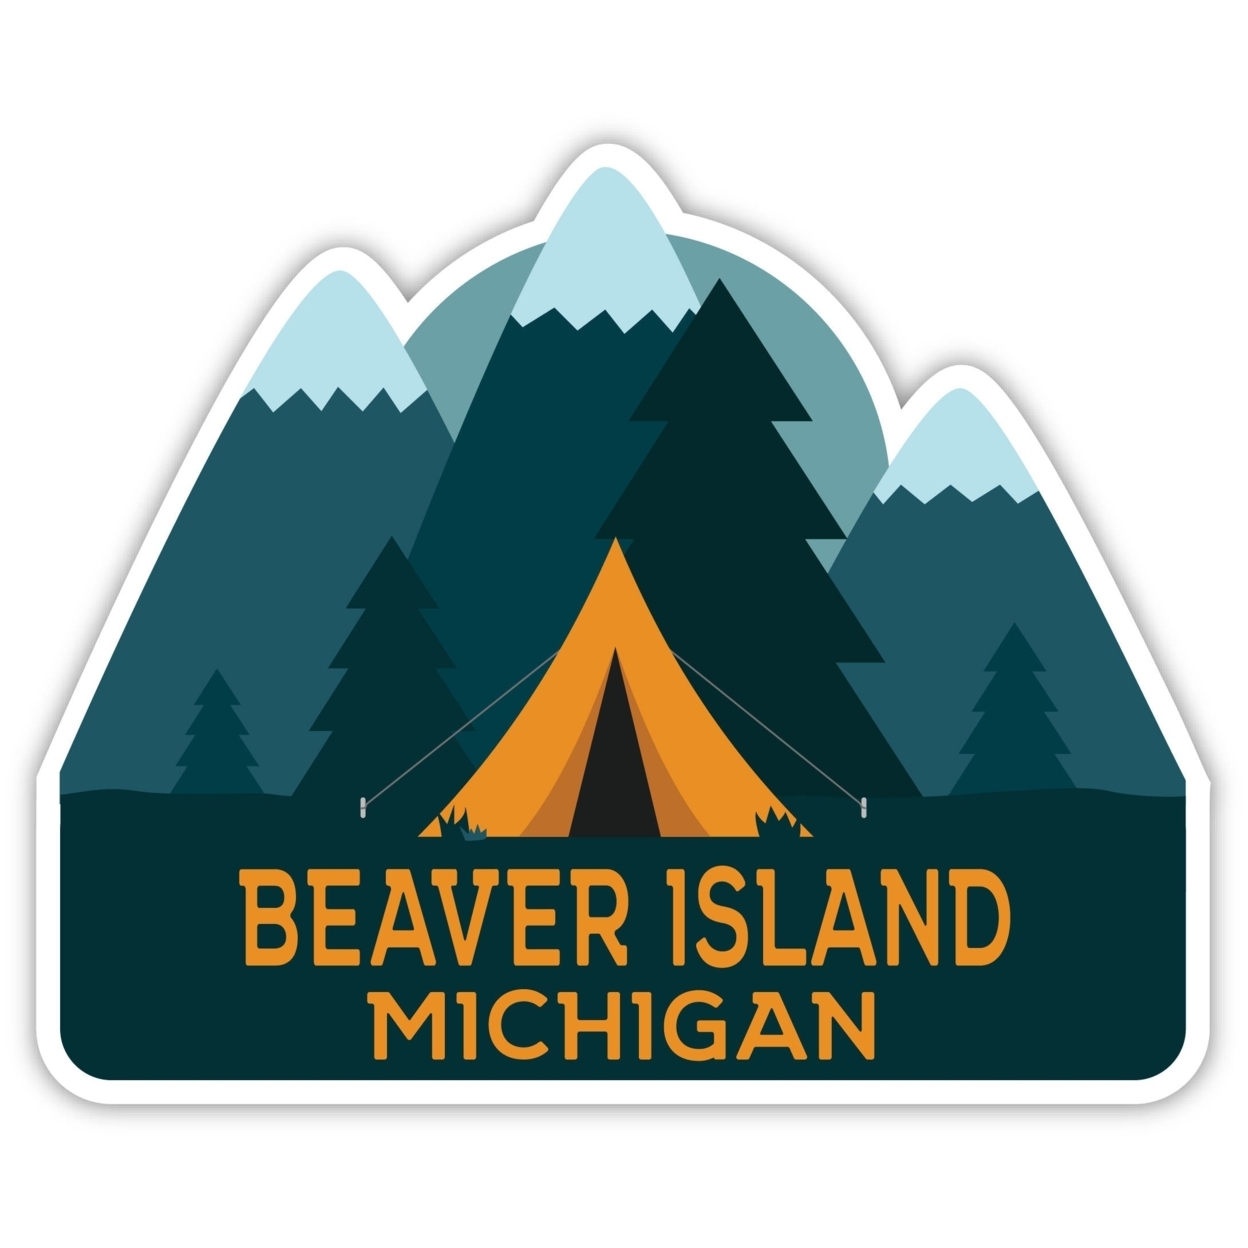 Beaver Island Michigan Souvenir Decorative Stickers (Choose Theme And Size) - Single Unit, 8-Inch, Great Outdoors